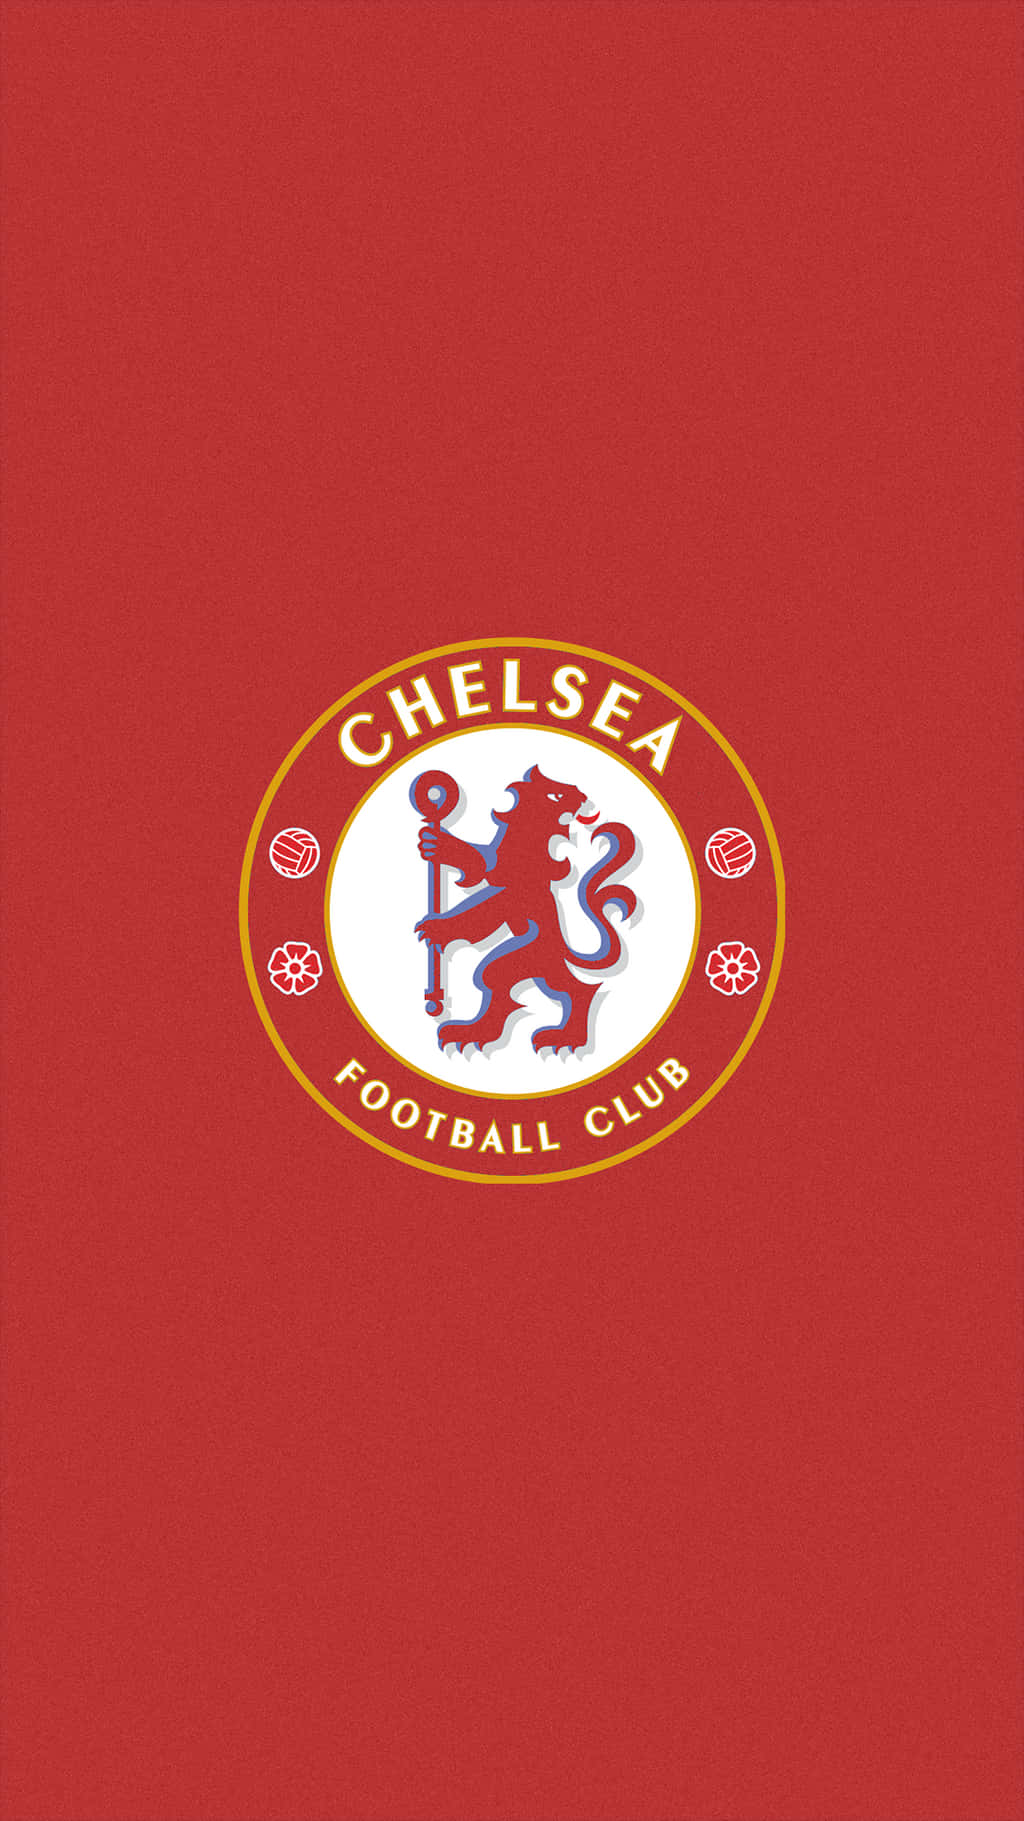 Chelsea Football Club Logo On A Red Background Wallpaper